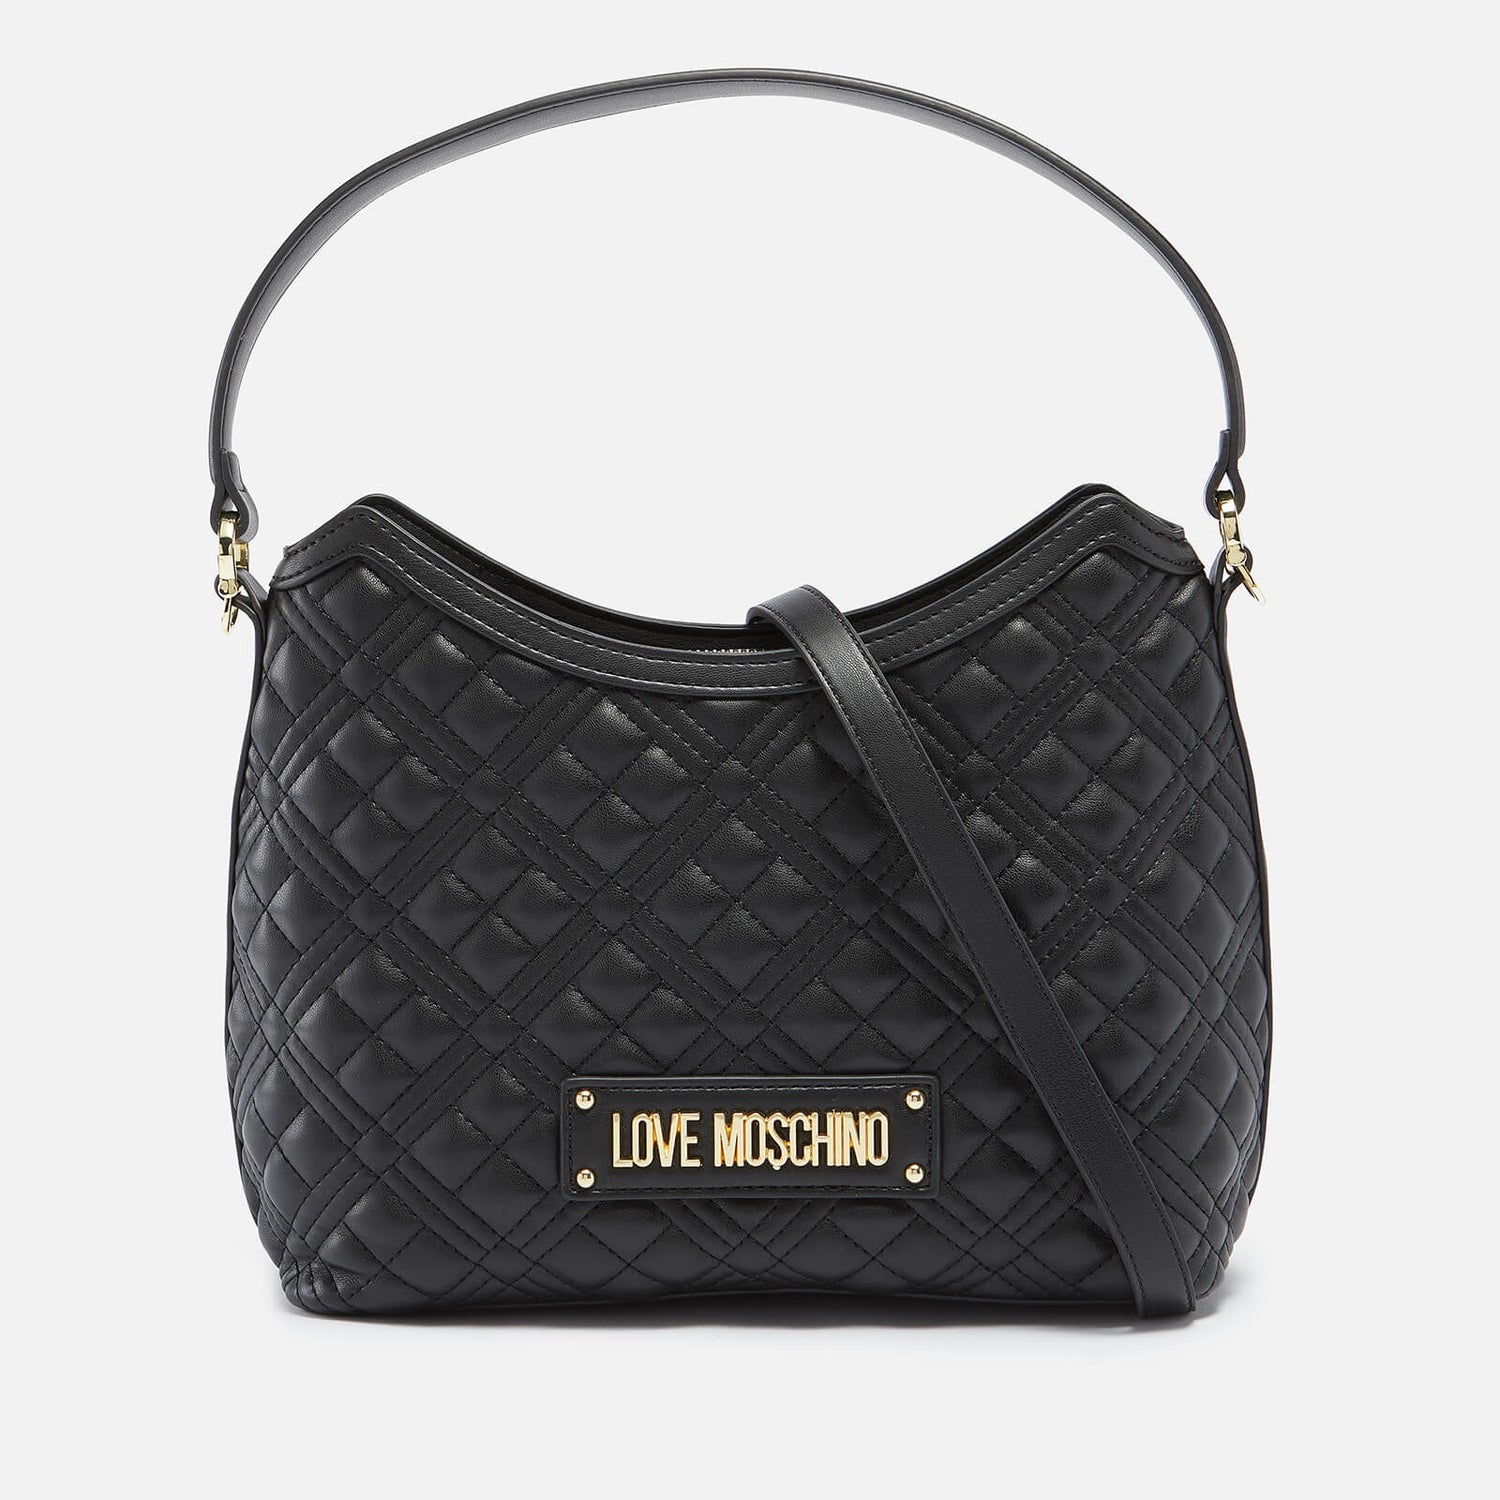 Love Moschino Women's Quilted Hobo Bag - Black